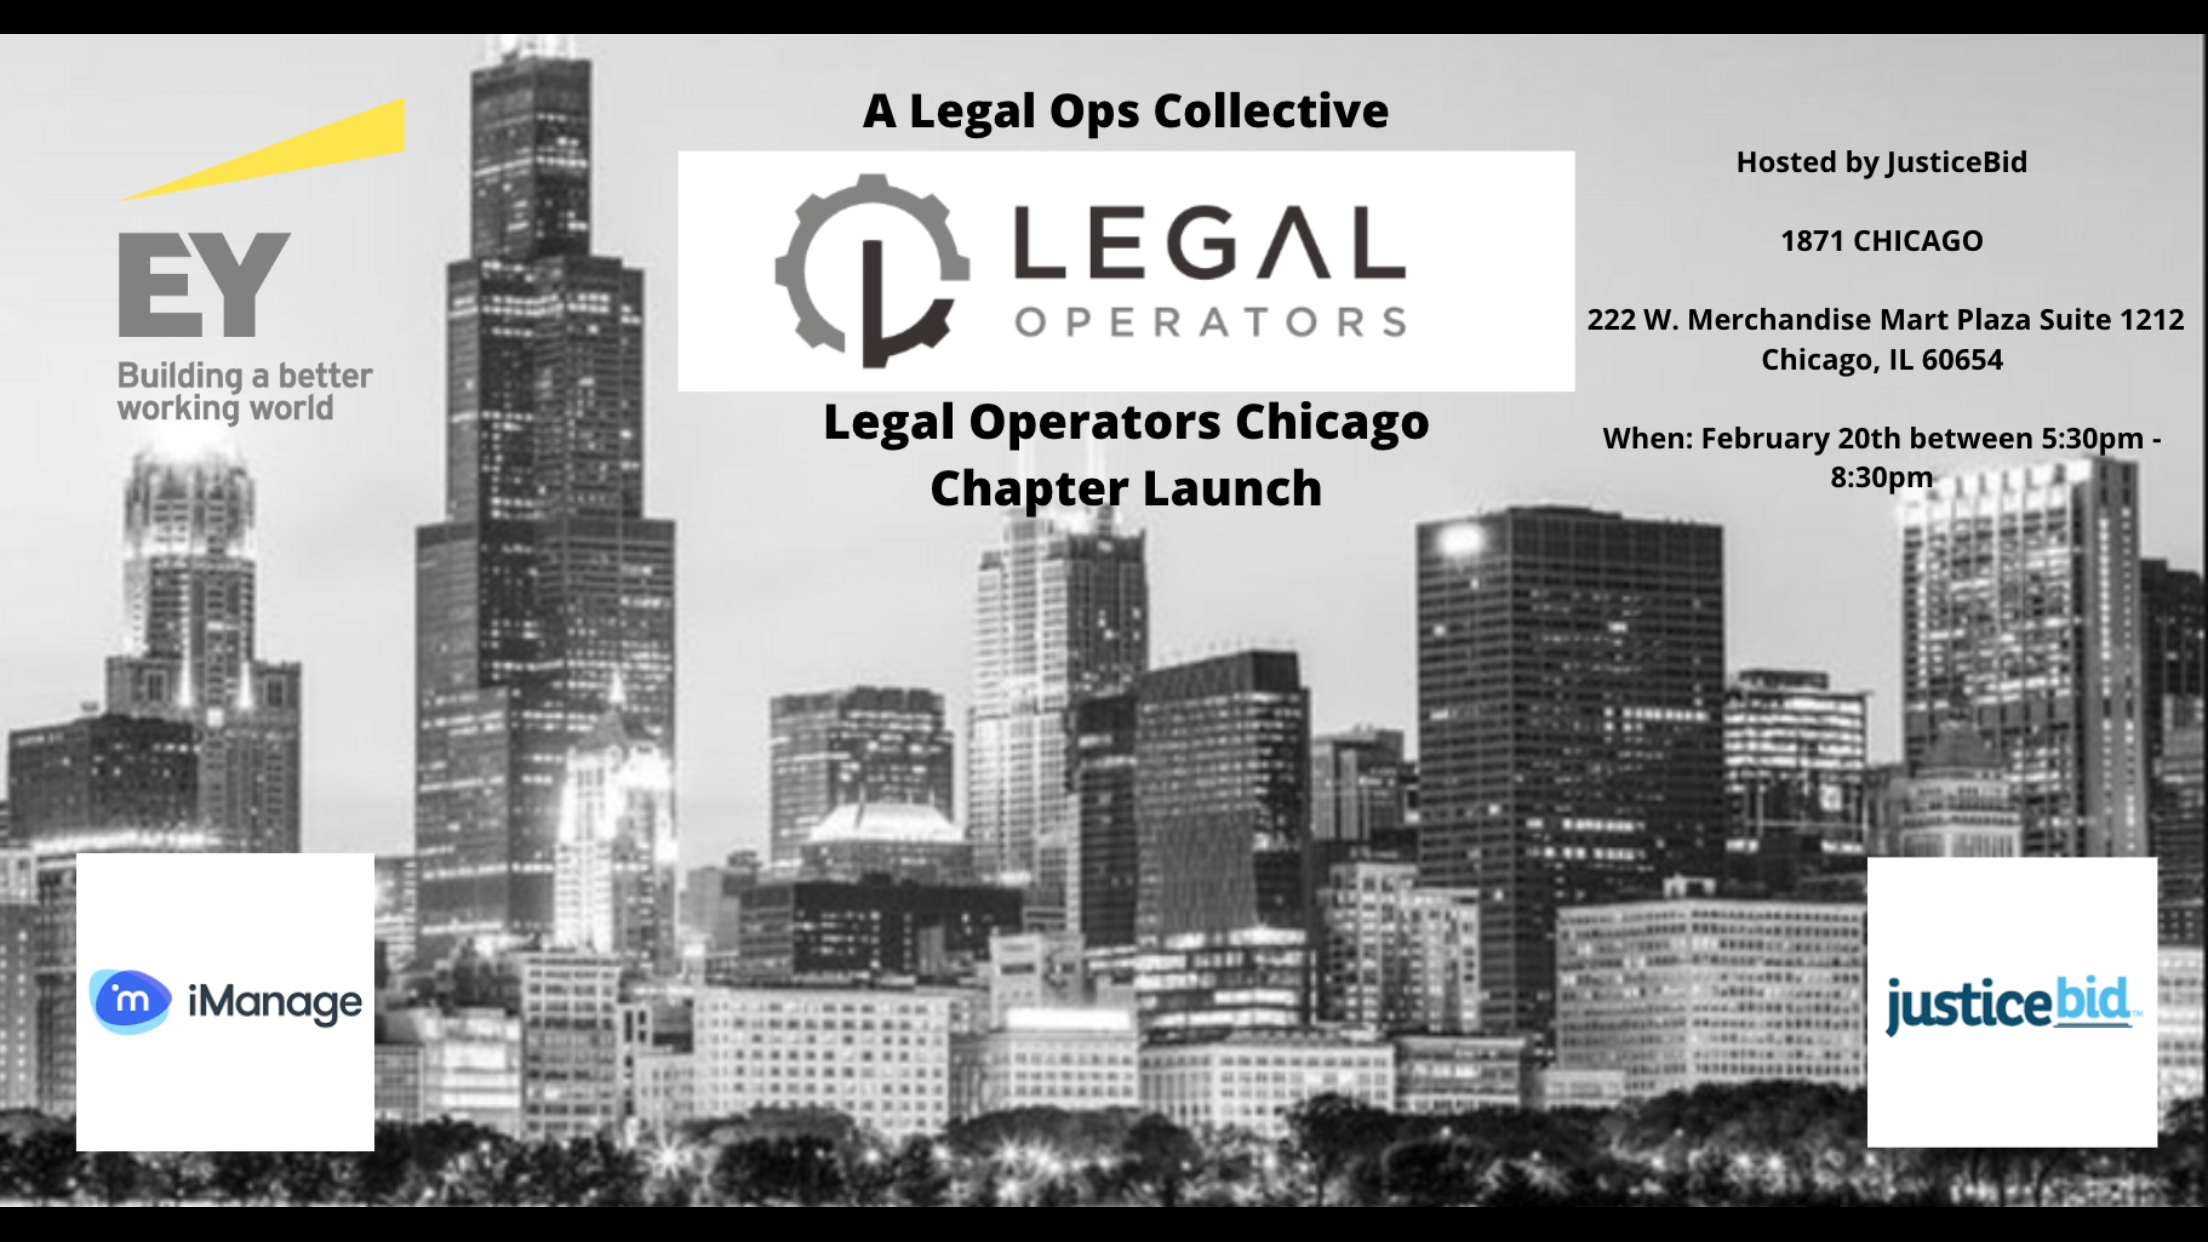 Legal Operators Chicago Launch - EY/iManage/JusticeBid